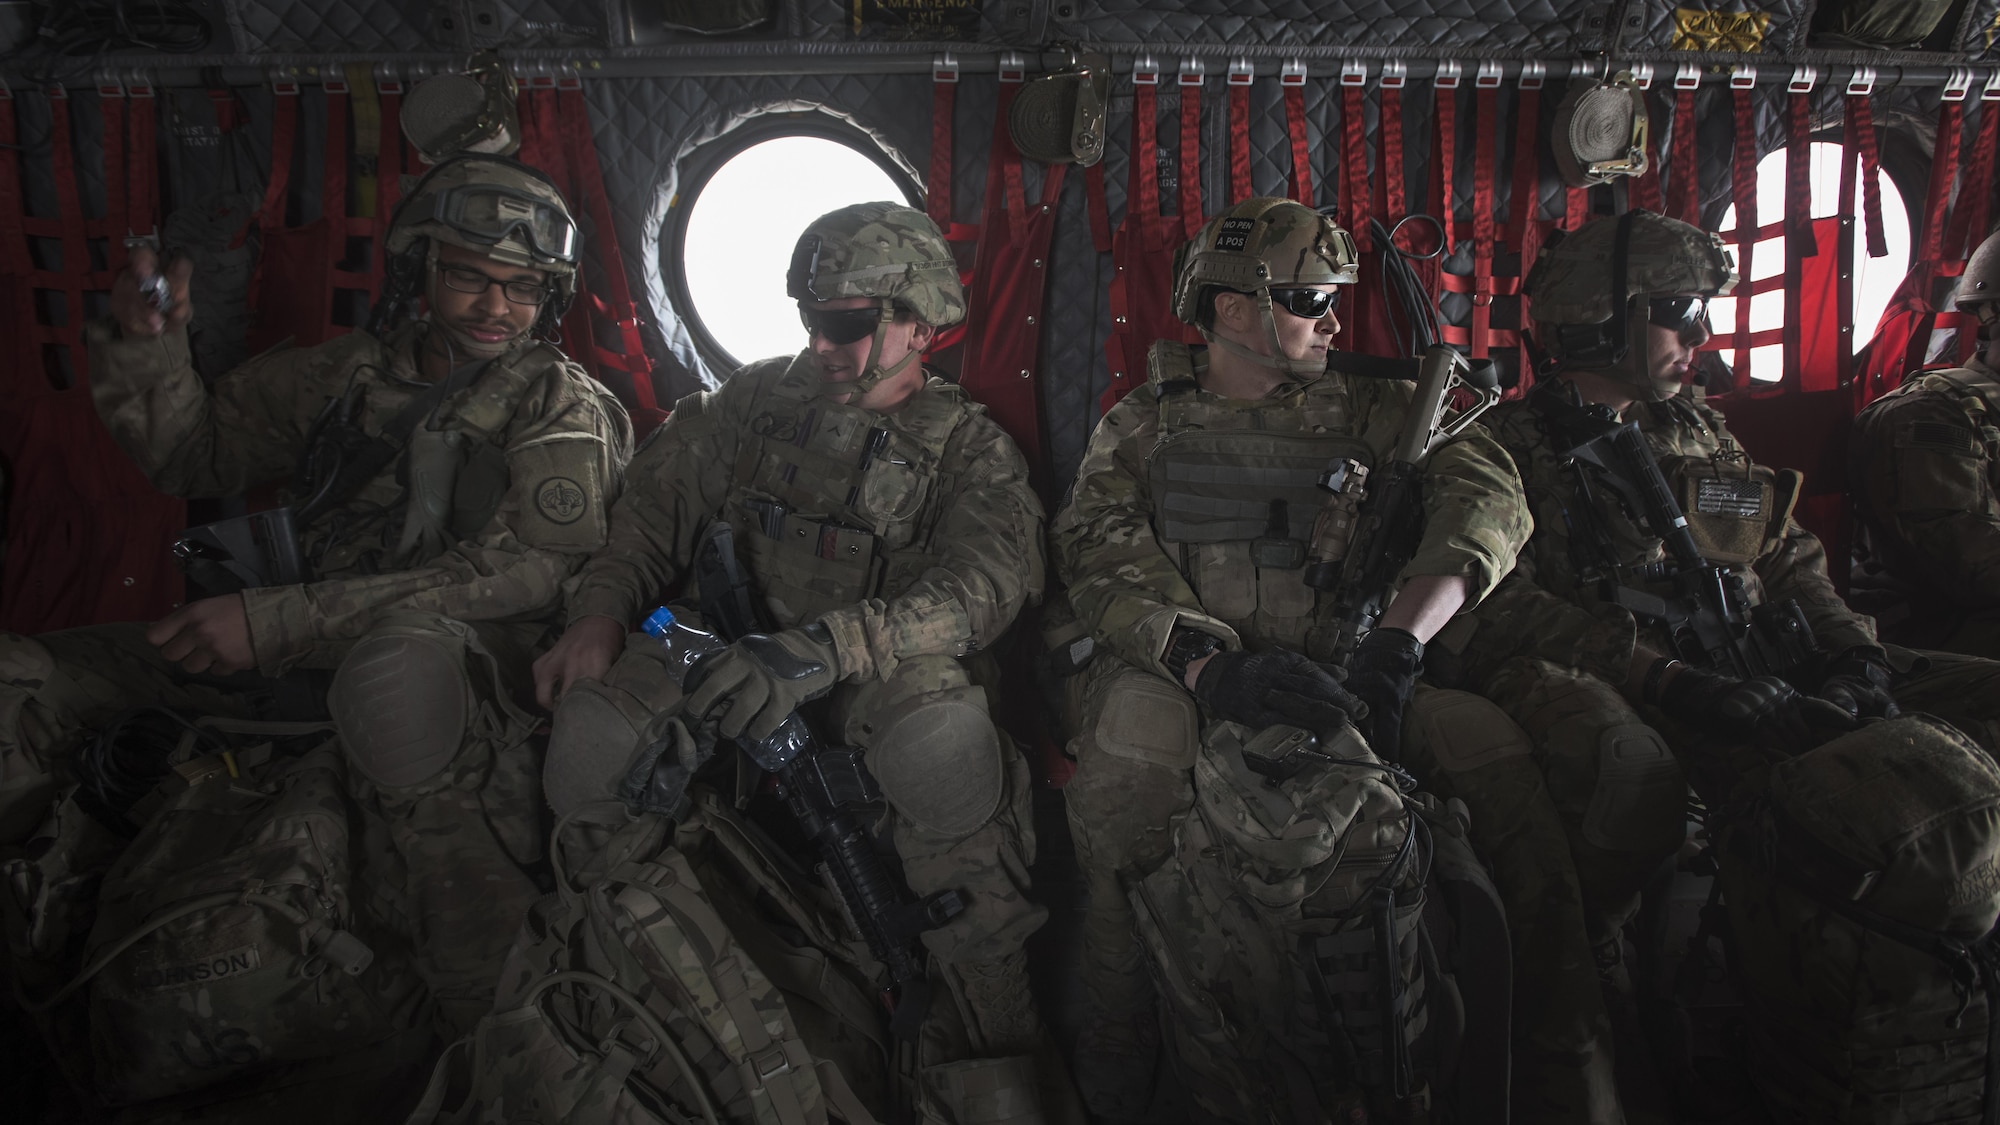 Members of Able Platoon, 1st Squadron, 3rd Cavalry Regiment, and Tech. Sgt. Jeremy Rarang, 817th Expeditionary Air Support Operations Squadron joint terminal attack controller, fly in a CH-47 Chinook after training Nov. 21, 2016 at Forward Operating Base Dahlke, Afghanistan. JTACs direct aircraft for use during close air support and offensive operations from a forward position. (U.S. Air Force photo by Staff Sgt. Katherine Spessa)